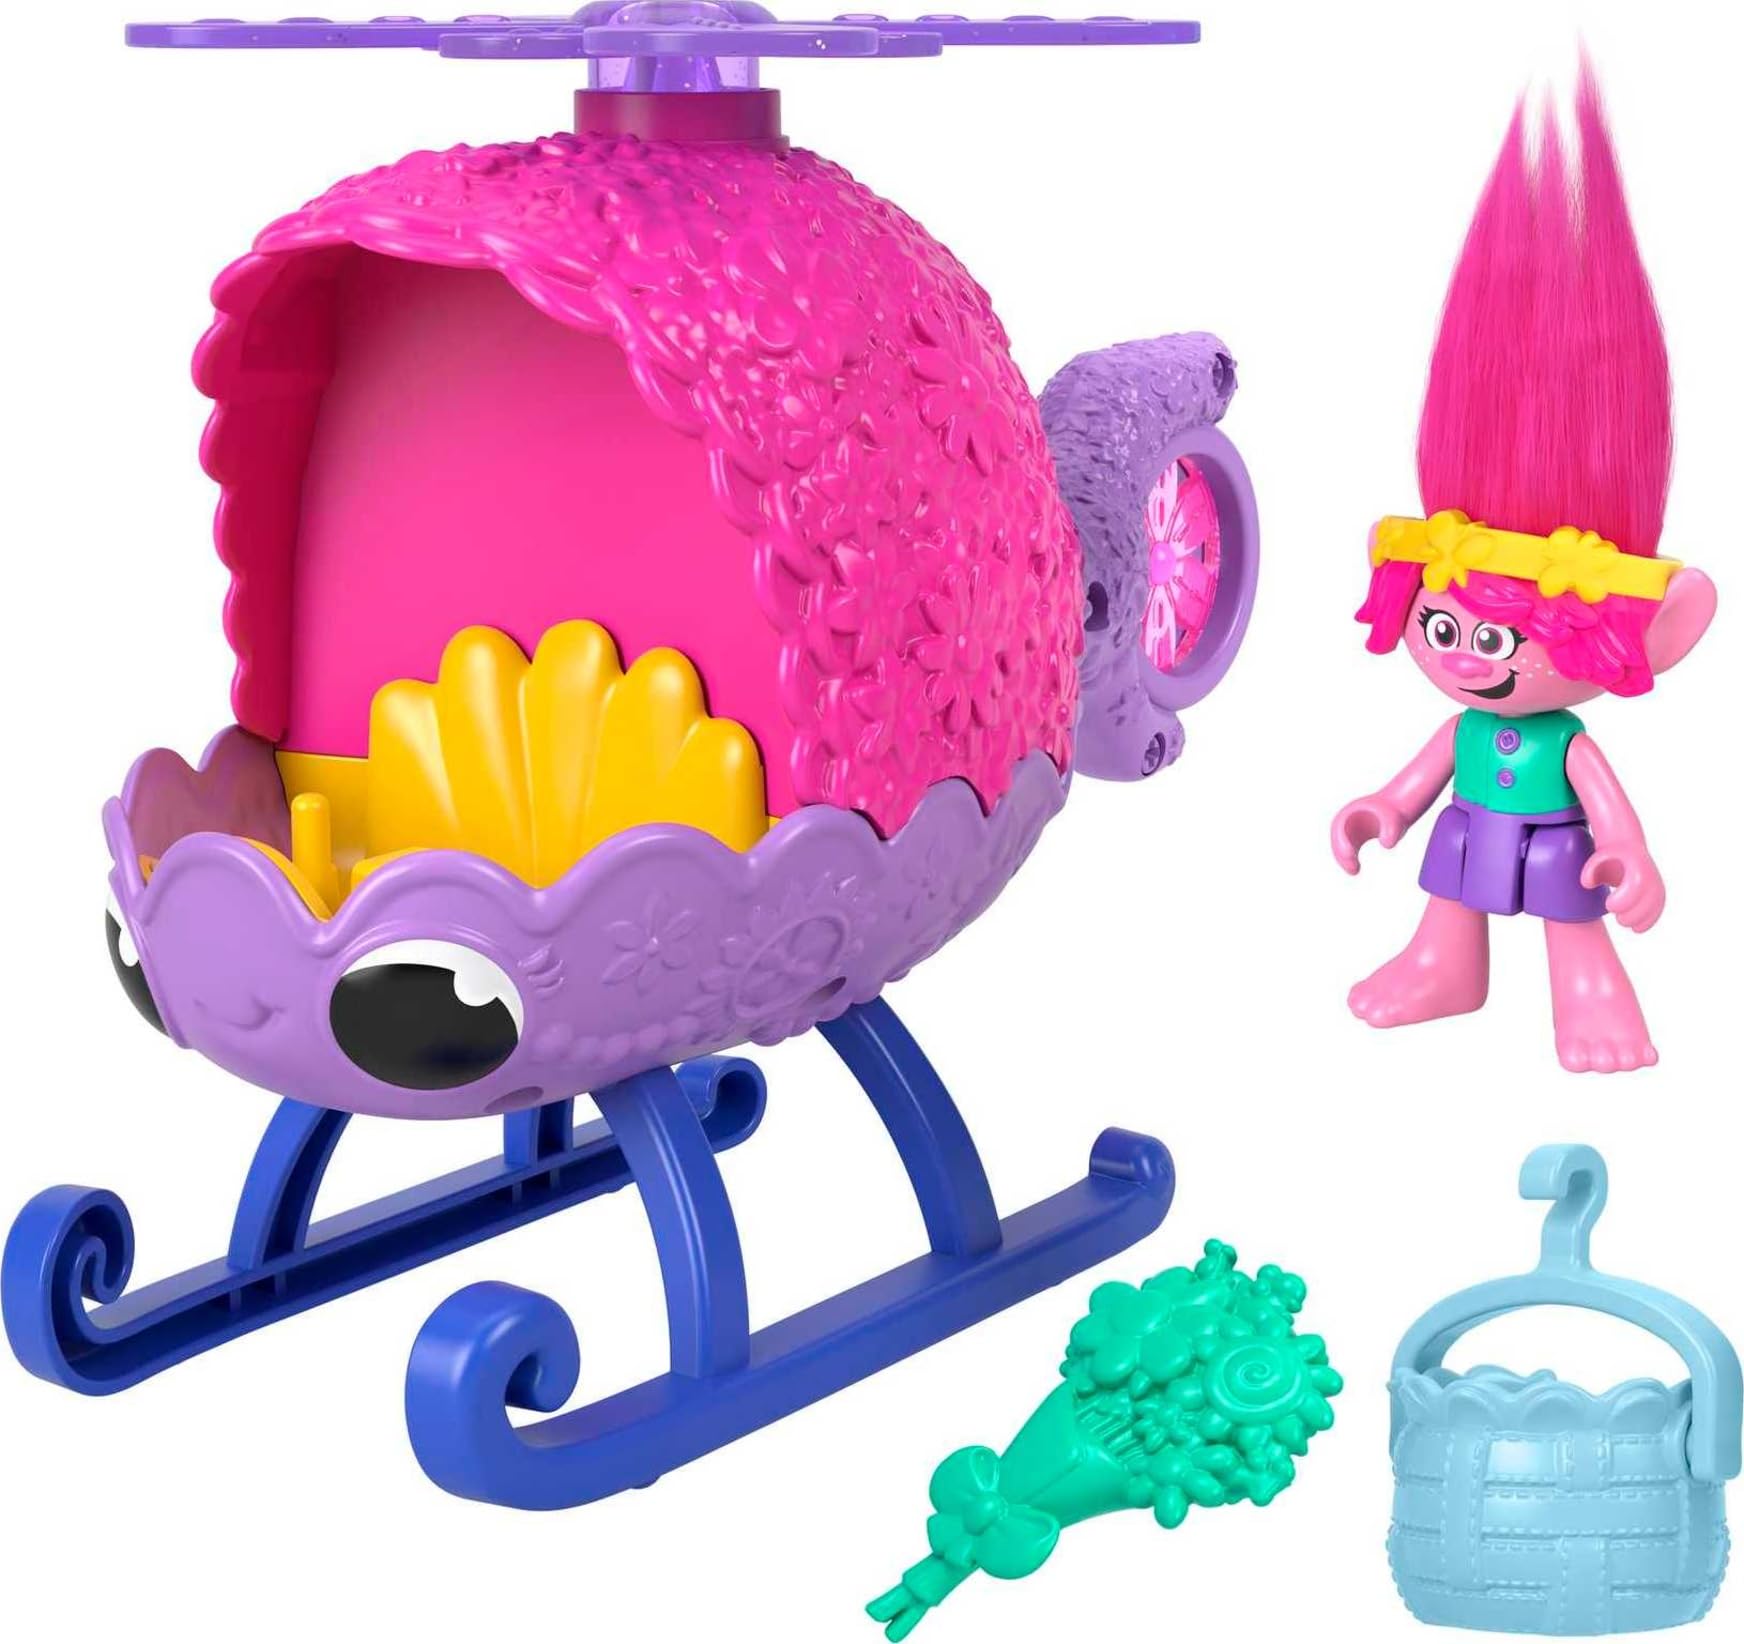 Fisher-Price Imaginext DreamWorks Trolls Toy Helicopter and Poppy Figure Playset, Poppy’s Copter with Spinning Propellers, Age 3-8 Years